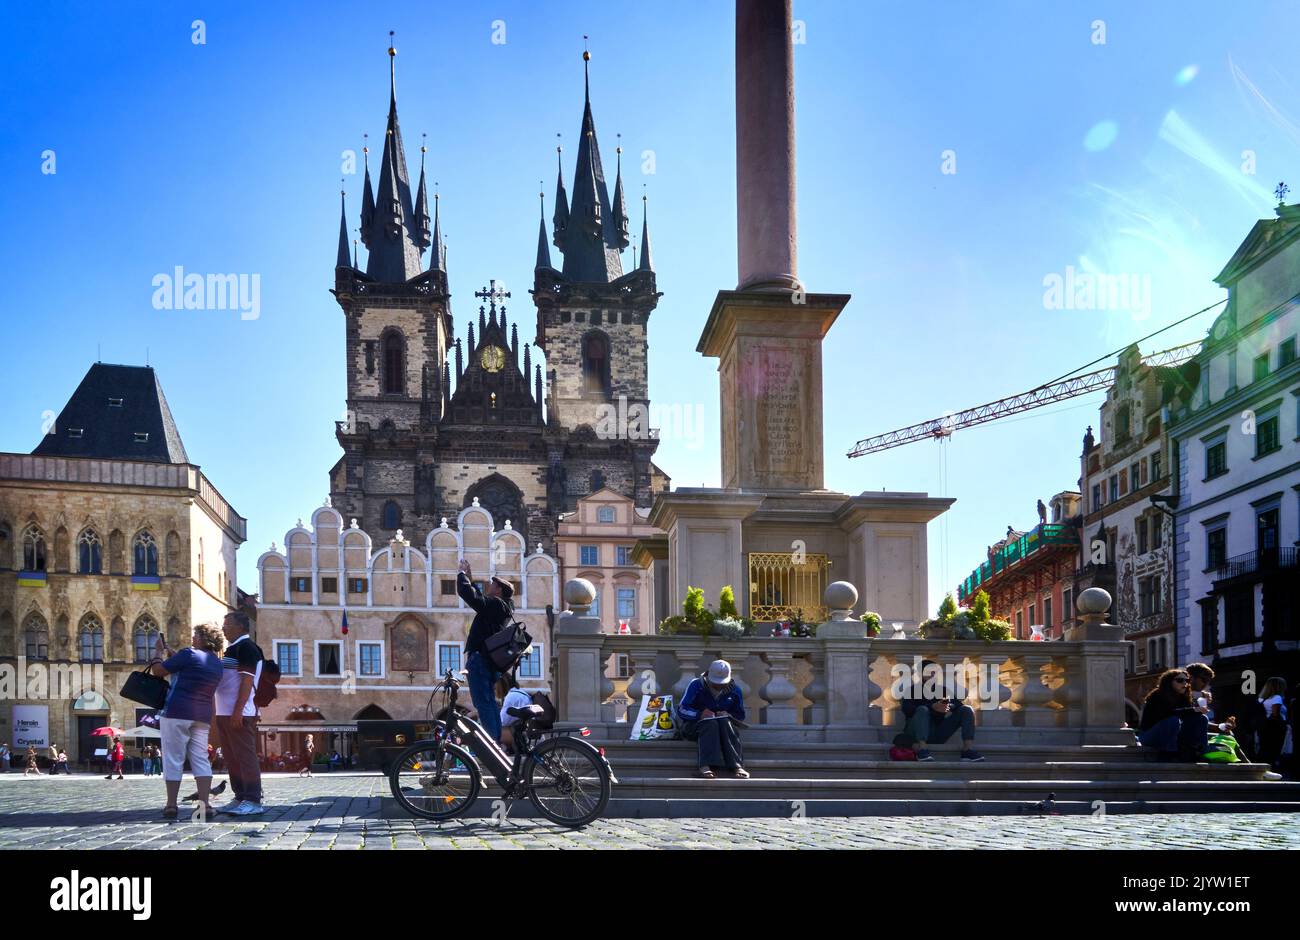 Prague, Czechia, August 29, 2022: Parked bicycle on the central market square of the Old Town of Prague Stock Photo